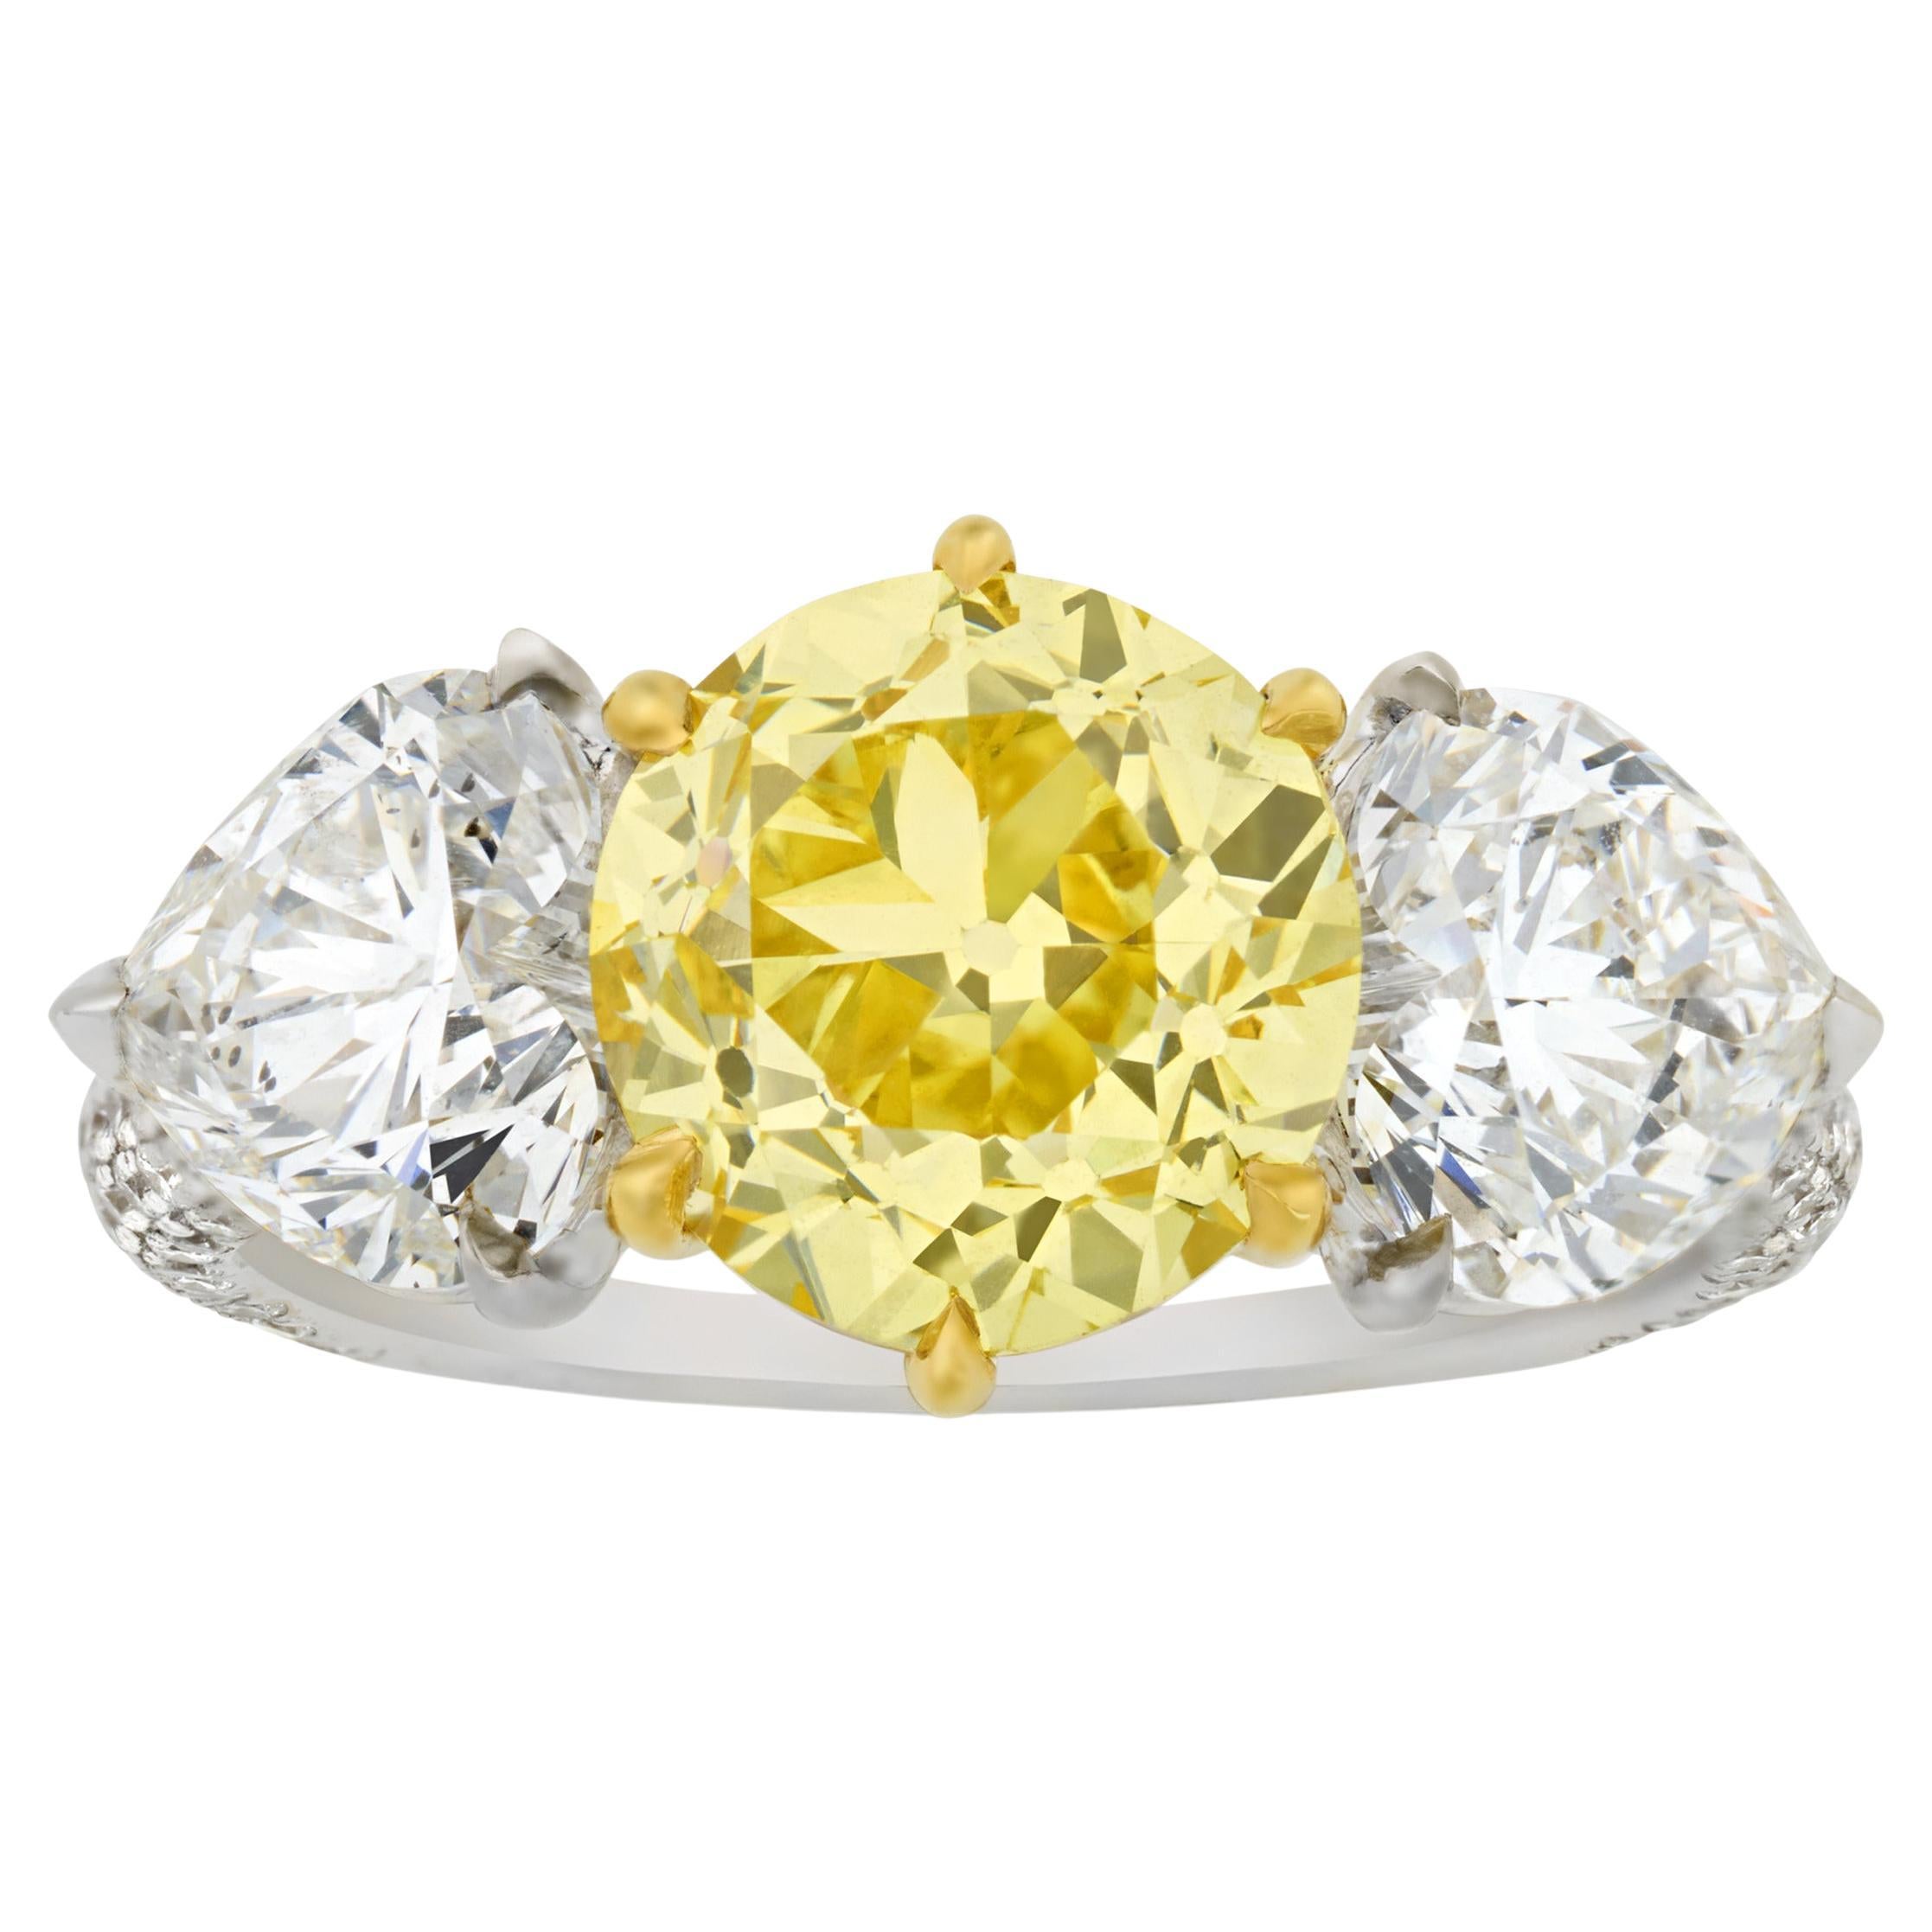 Fancy Intense Yellow Diamond Ring, 2.59 Carats For Sale